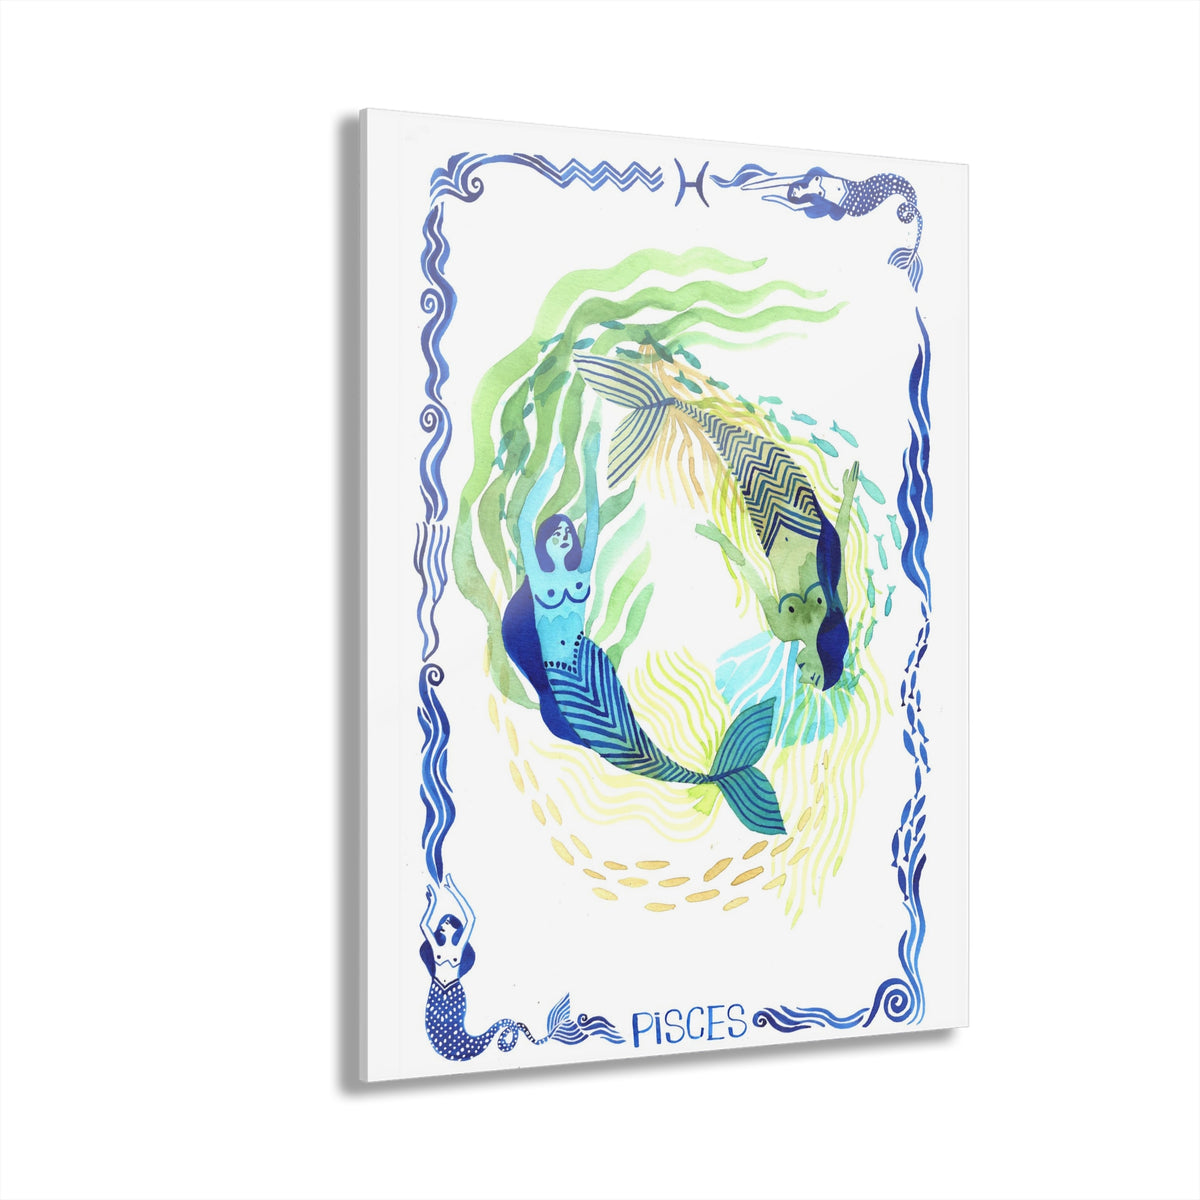 Pisces' Paradise: Acrylic Print with French Cleat Hanging